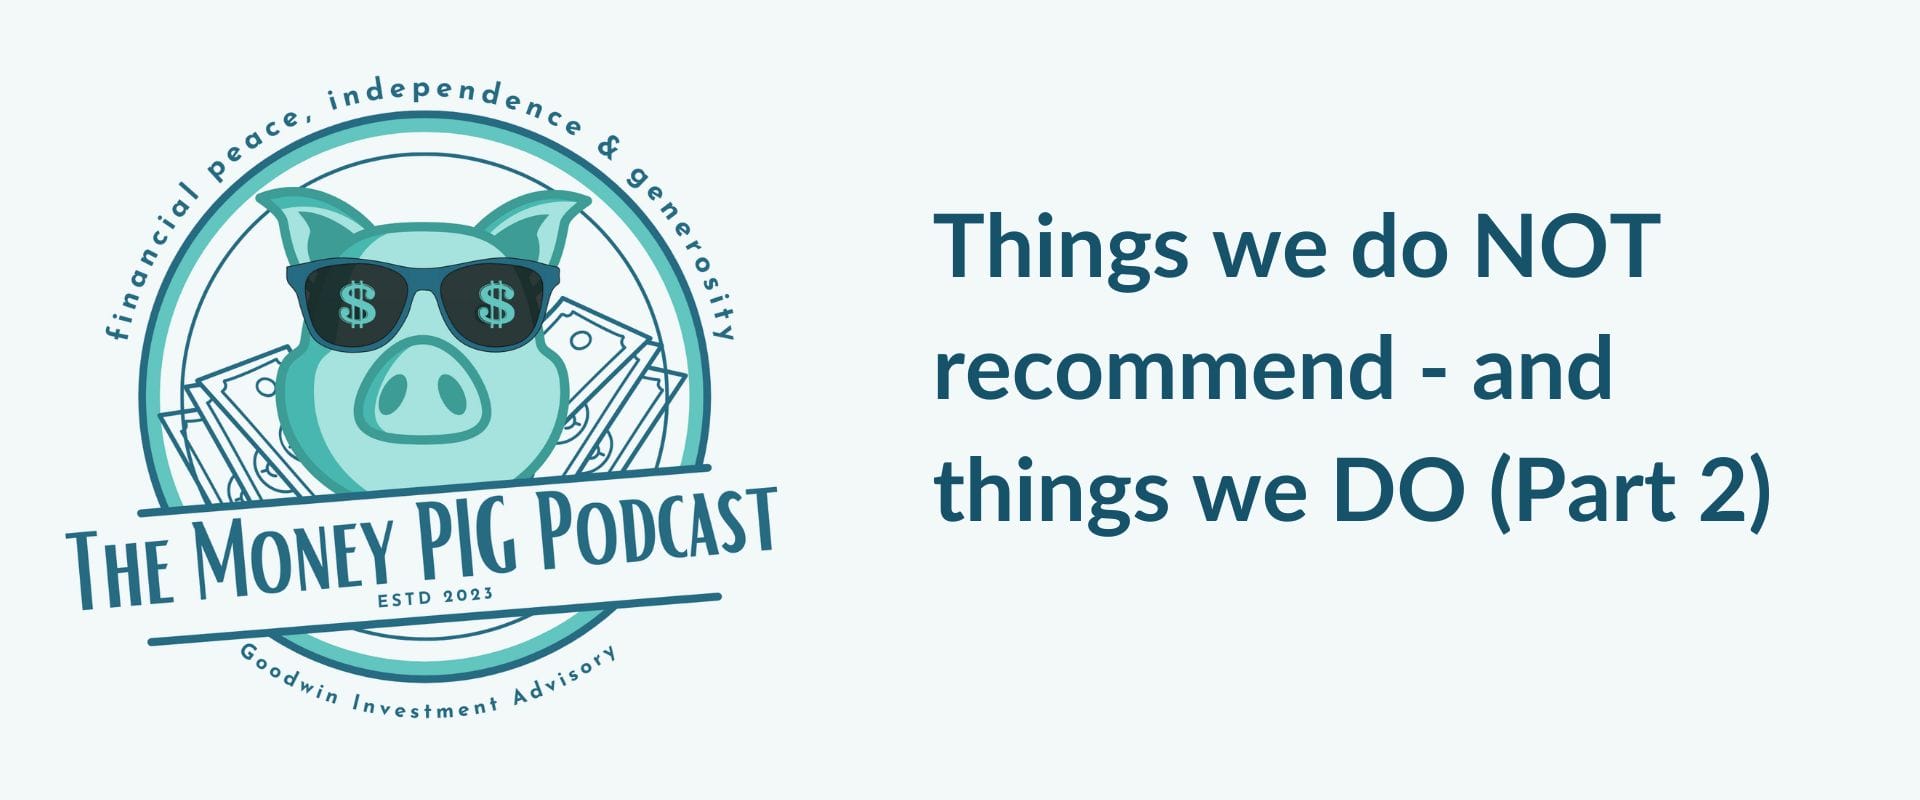 Things we do NOT recommend - and things we DO (Part 2)